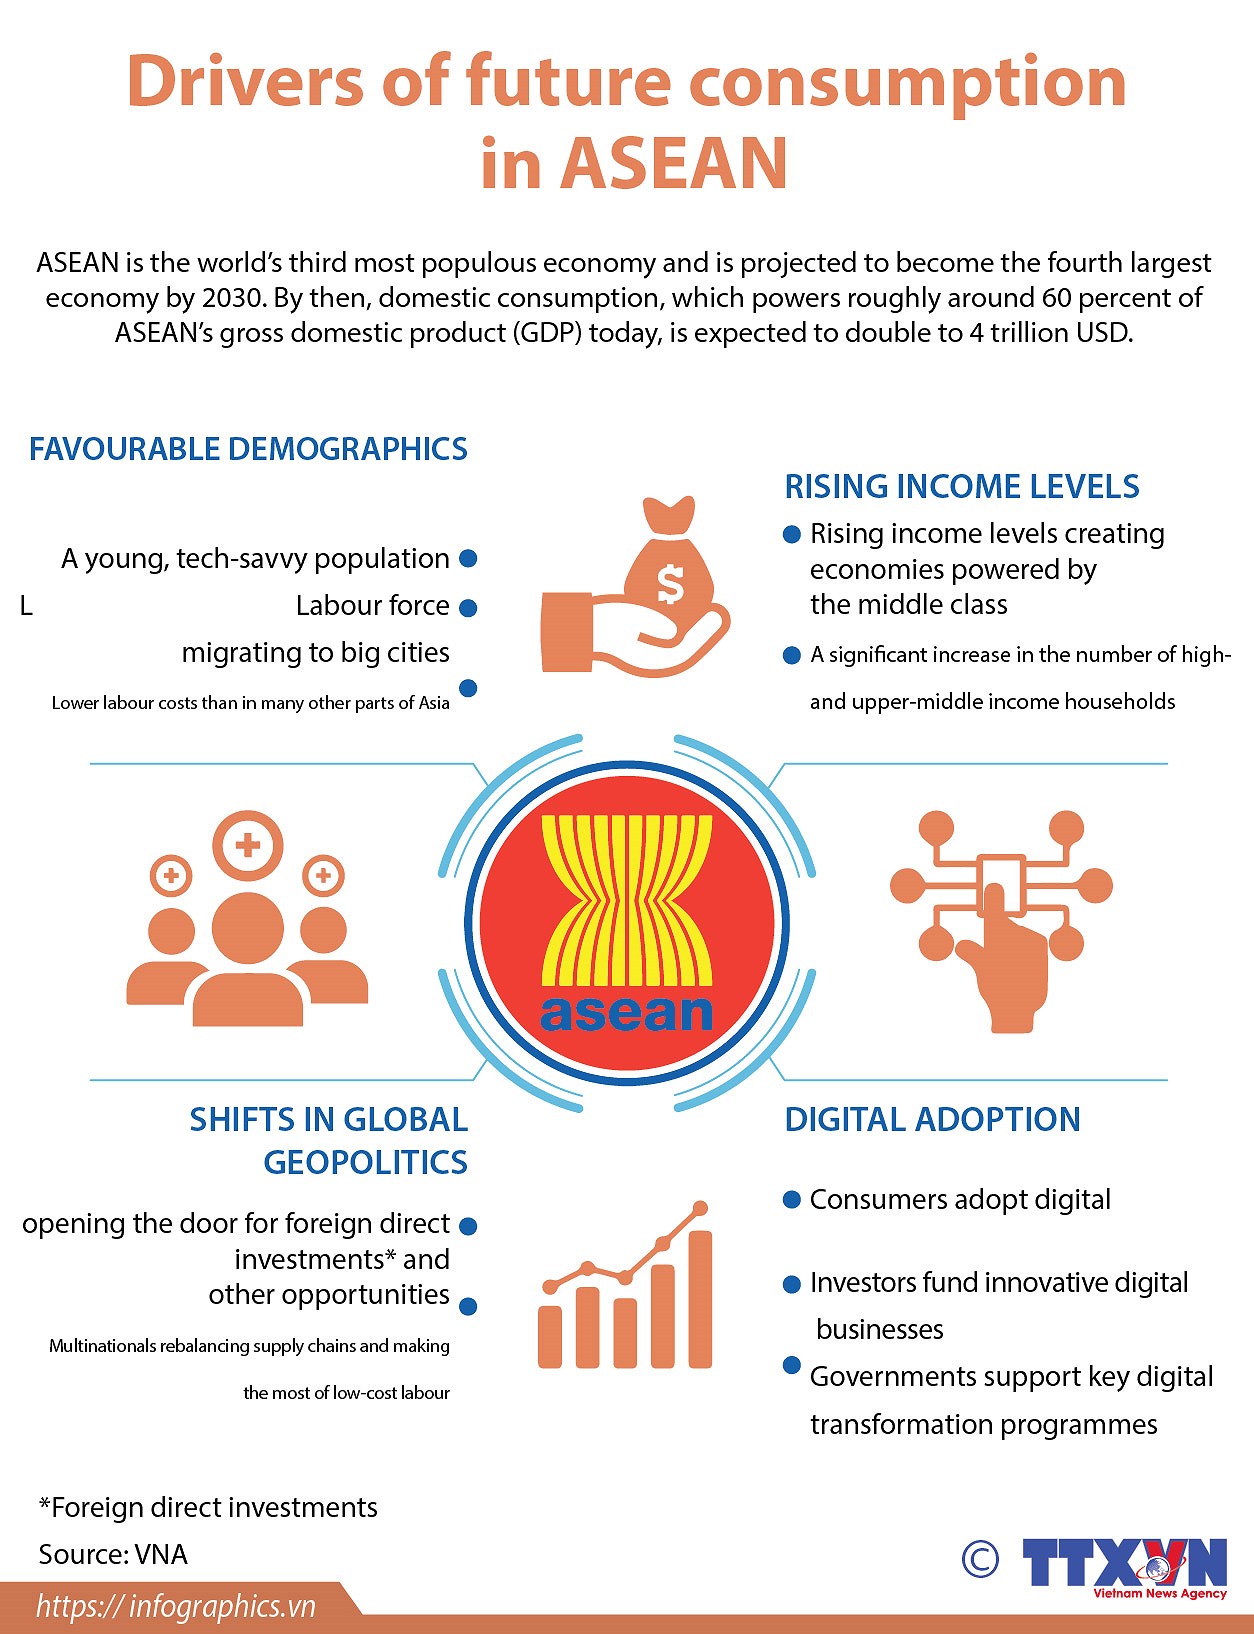 Drivers of future consumption in ASEAN hinh anh 1